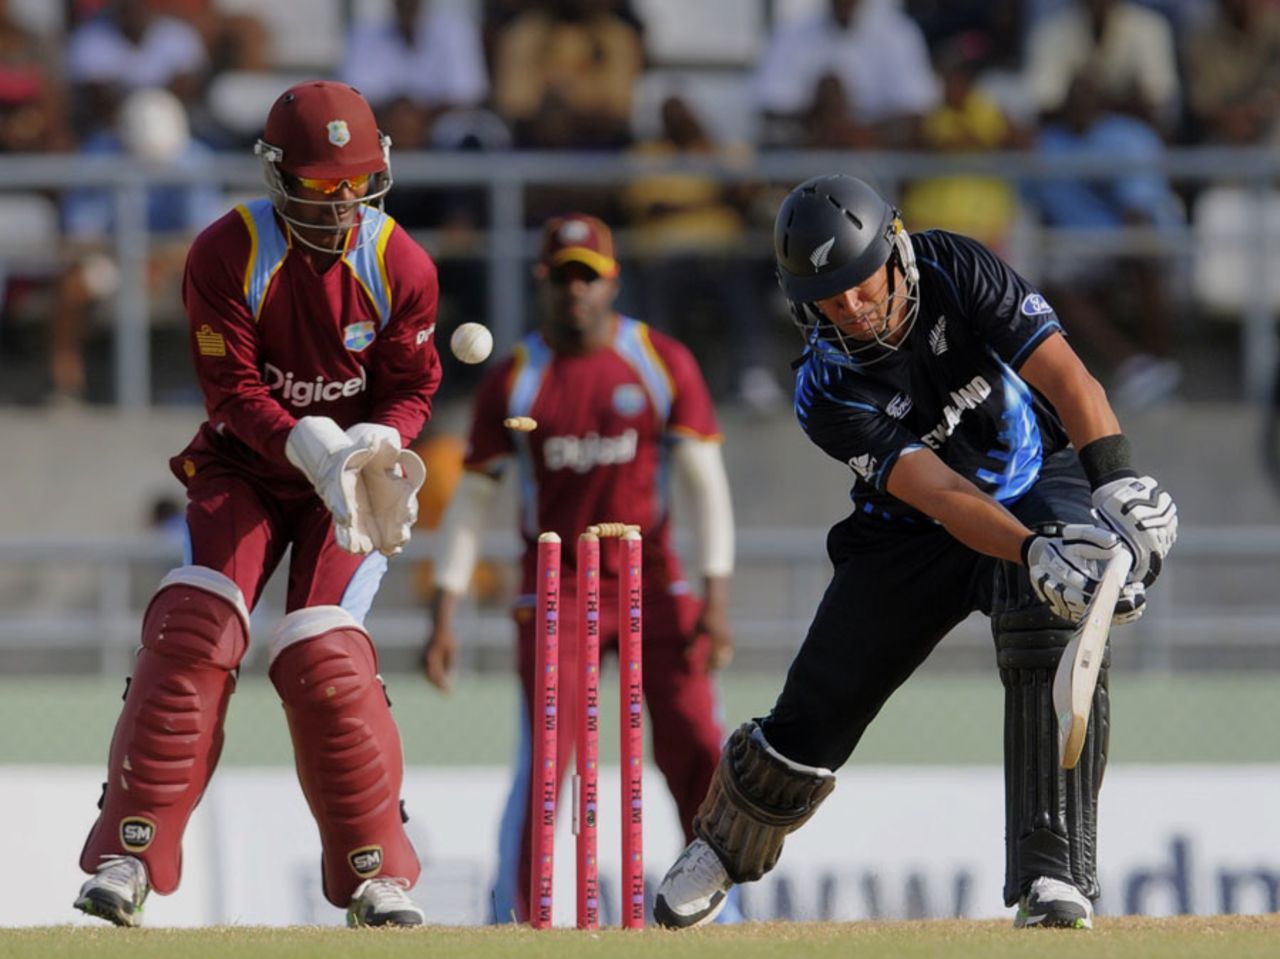 Ross Taylor lost his wicket to Sunil Narine, West Indies v New Zealand, 2nd T20I, Dominica, July 6, 2014